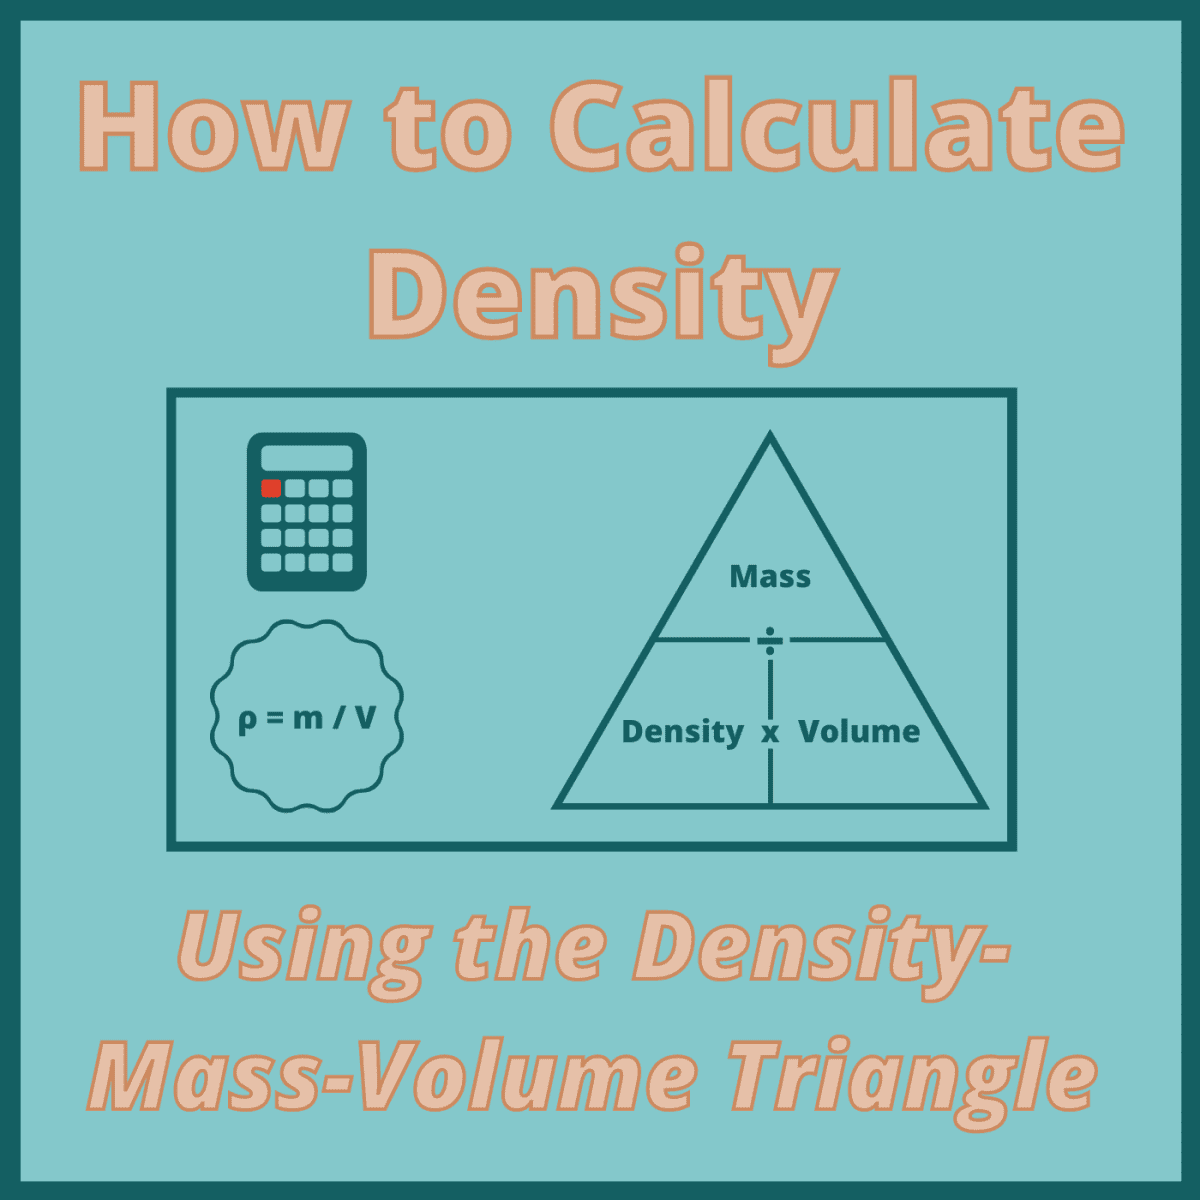 Using the Density-Mass-Volume Triangle to Calculate Density